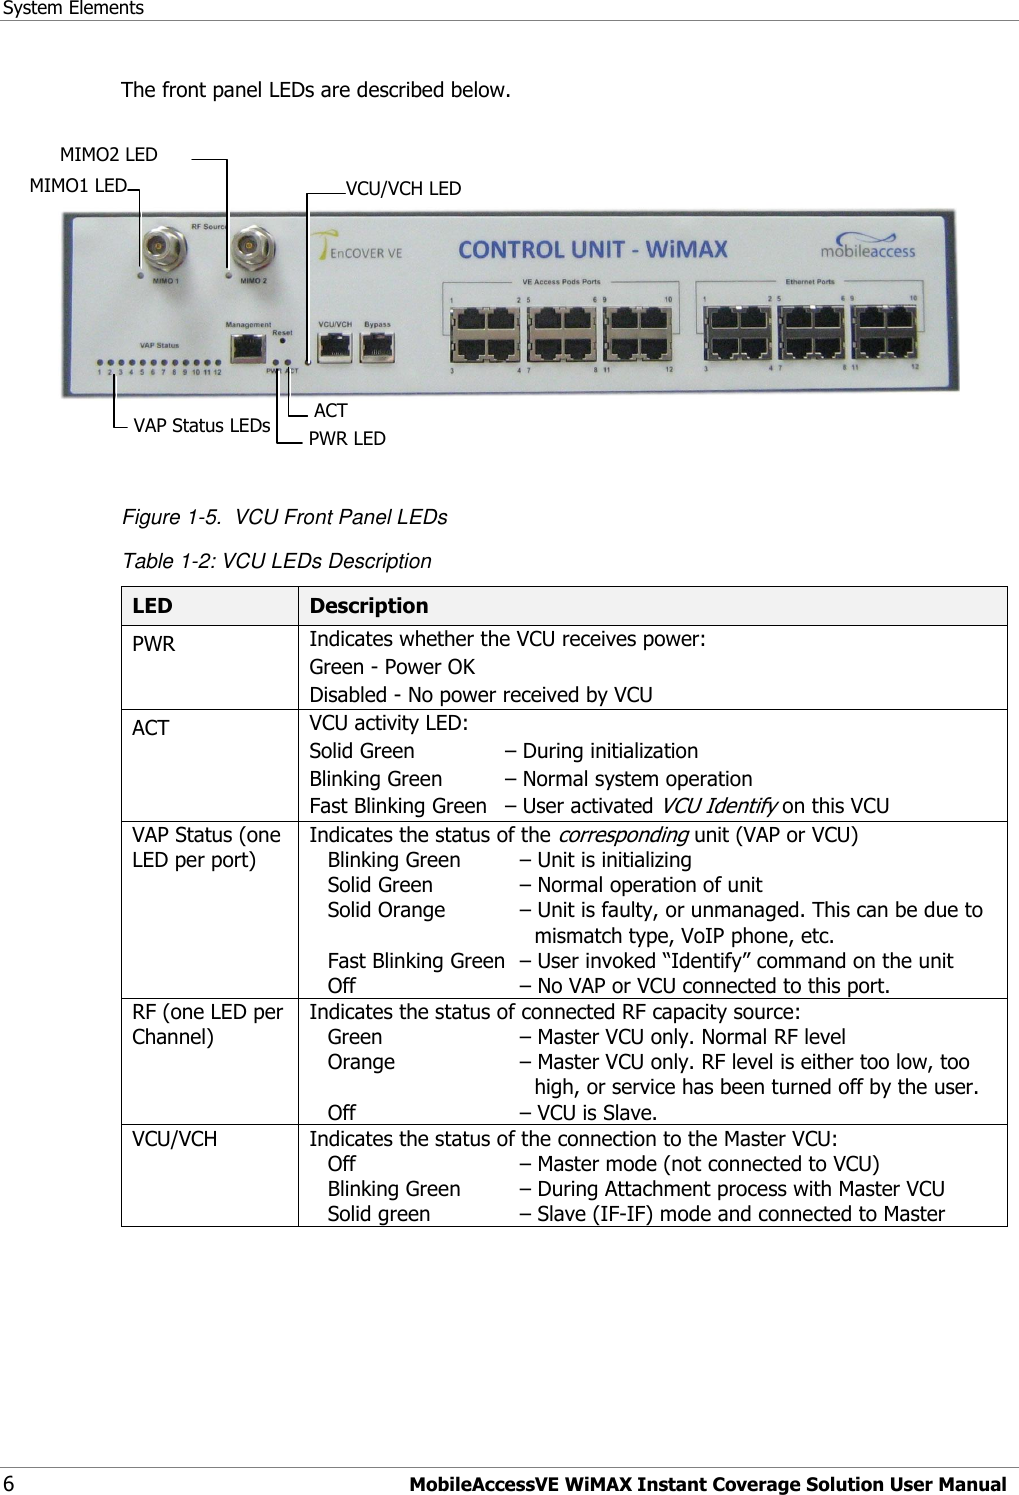 System Elements 6  MobileAccessVE WiMAX Instant Coverage Solution User Manual The front panel LEDs are described below.      Figure 1-5.  VCU Front Panel LEDs Table 1-2: VCU LEDs Description LED Description PWR Indicates whether the VCU receives power: Green - Power OK  Disabled - No power received by VCU ACT VCU activity LED: Solid Green   – During initialization Blinking Green   – Normal system operation Fast Blinking Green   – User activated VCU Identify on this VCU VAP Status (one LED per port) Indicates the status of the corresponding unit (VAP or VCU) Blinking Green   – Unit is initializing Solid Green   – Normal operation of unit Solid Orange   – Unit is faulty, or unmanaged. This can be due to mismatch type, VoIP phone, etc. Fast Blinking Green  – User invoked “Identify” command on the unit Off   – No VAP or VCU connected to this port. RF (one LED per Channel) Indicates the status of connected RF capacity source:  Green   – Master VCU only. Normal RF level  Orange     – Master VCU only. RF level is either too low, too high, or service has been turned off by the user.  Off   – VCU is Slave. VCU/VCH Indicates the status of the connection to the Master VCU:  Off   – Master mode (not connected to VCU) Blinking Green   – During Attachment process with Master VCU Solid green   – Slave (IF-IF) mode and connected to Master  VAP Status LEDs  PWR LED  ACT  VCU/VCH LED   MIMO1 LED   MIMO2 LED   